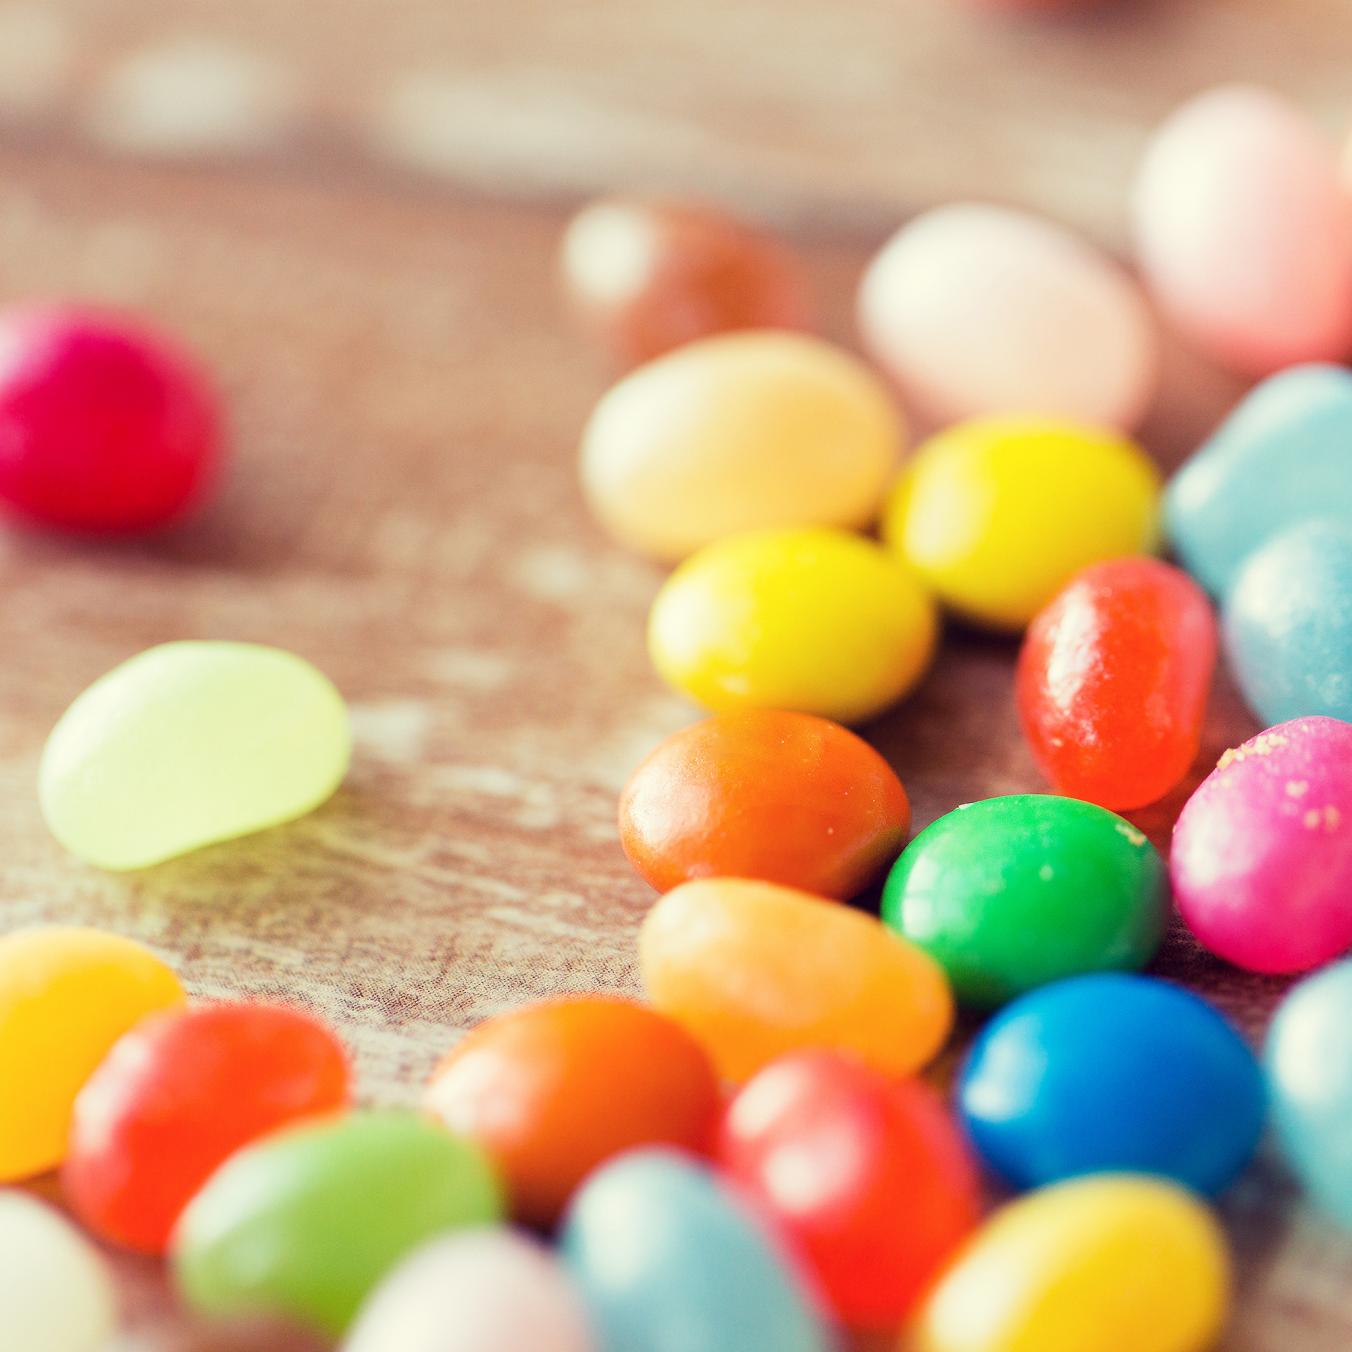 Earth Day + Jelly Bean Day = Herbal Sweetness